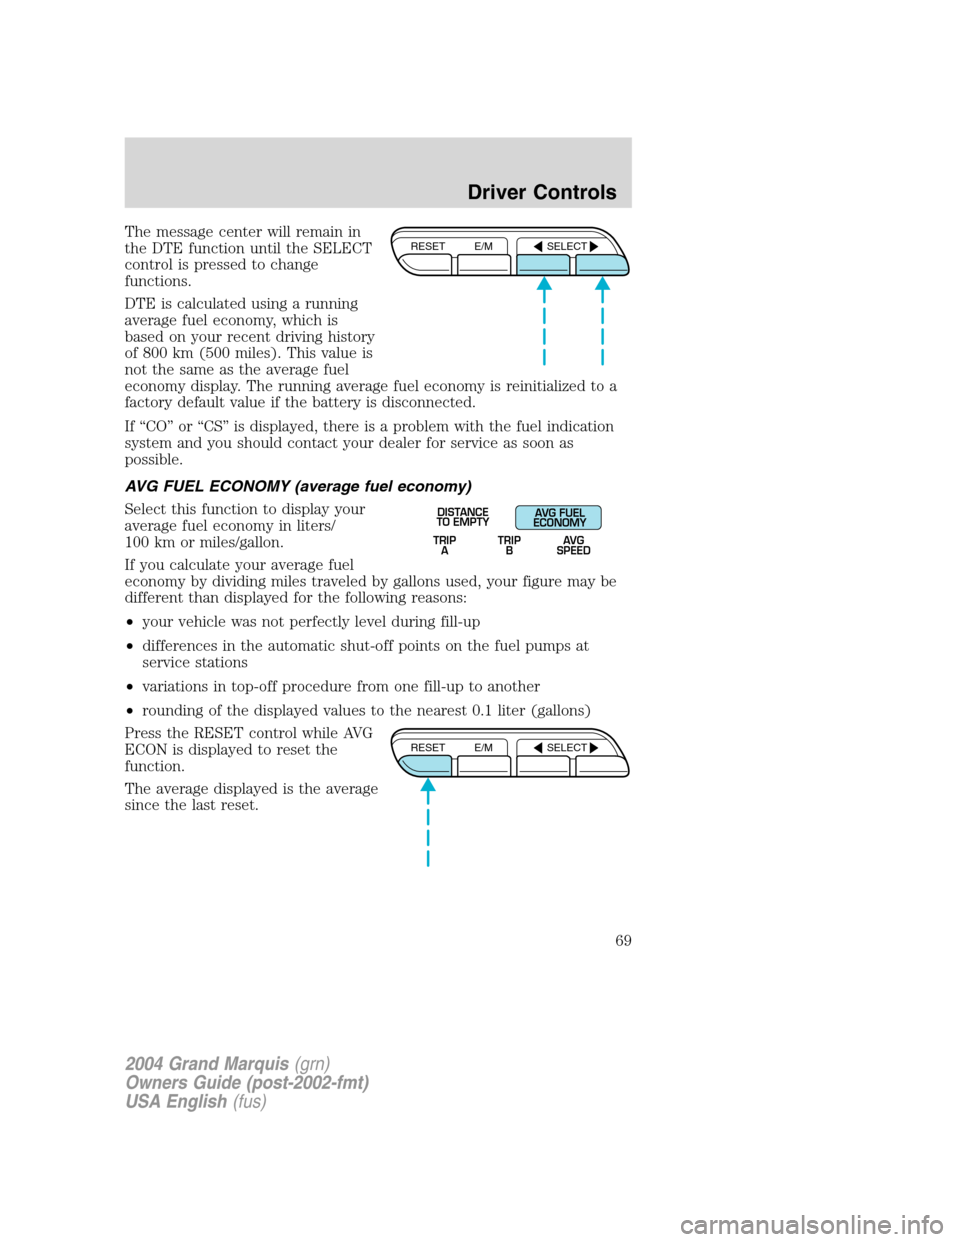 Mercury Grand Marquis 2004  s Repair Manual The message center will remain in
the DTE function until the SELECT
control is pressed to change
functions.
DTE is calculated using a running
average fuel economy, which is
based on your recent drivin